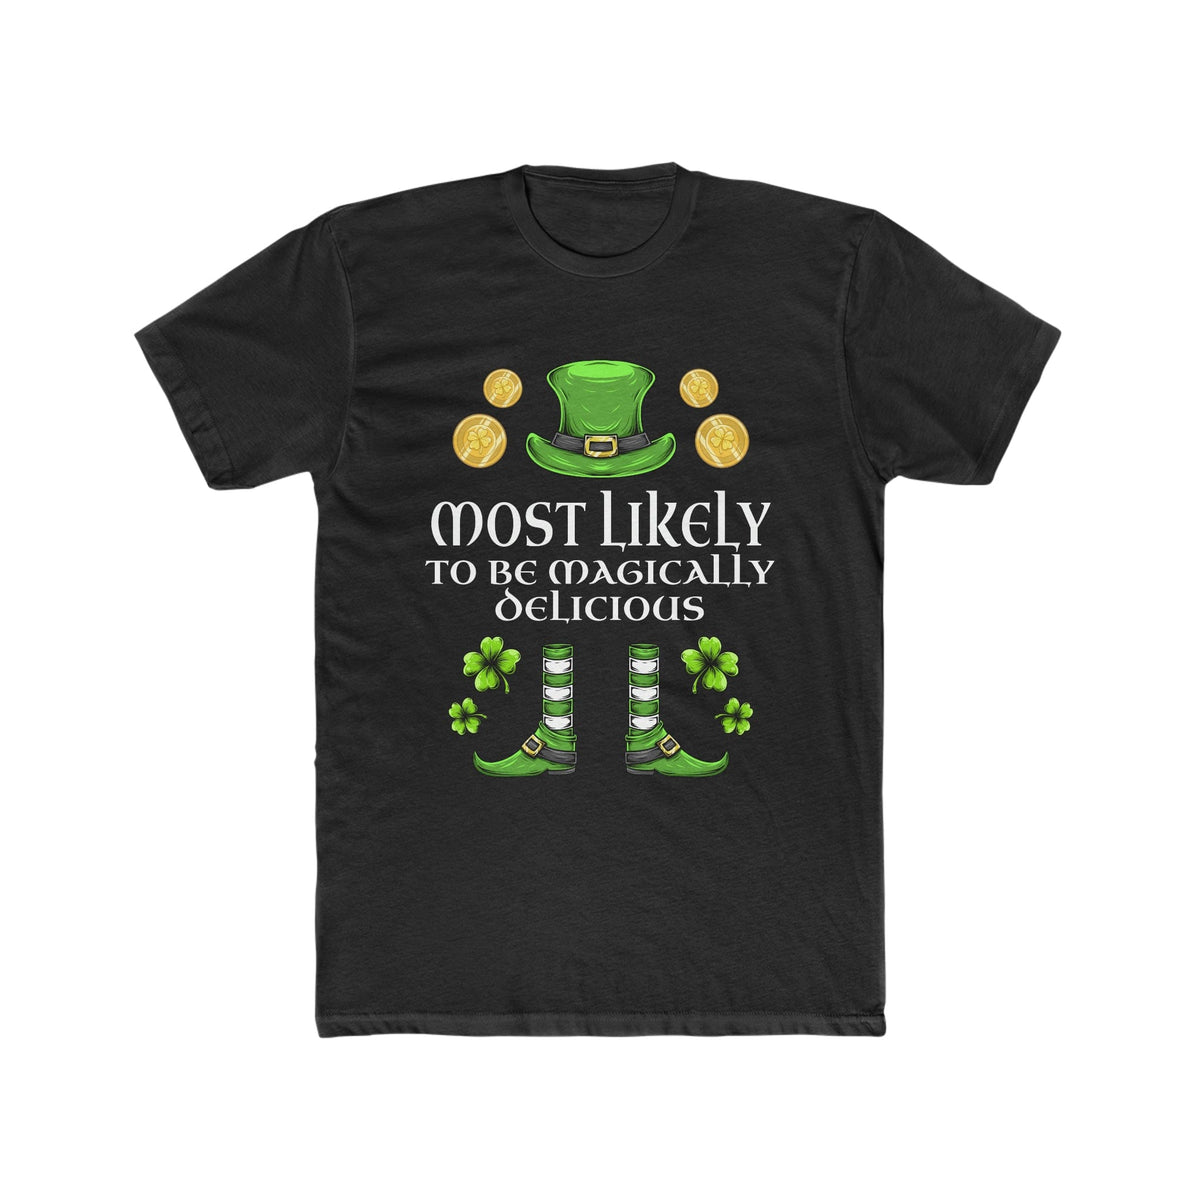 Most likely TO BE MAGICALLY DELICIOUS Premium Unisex Shirt